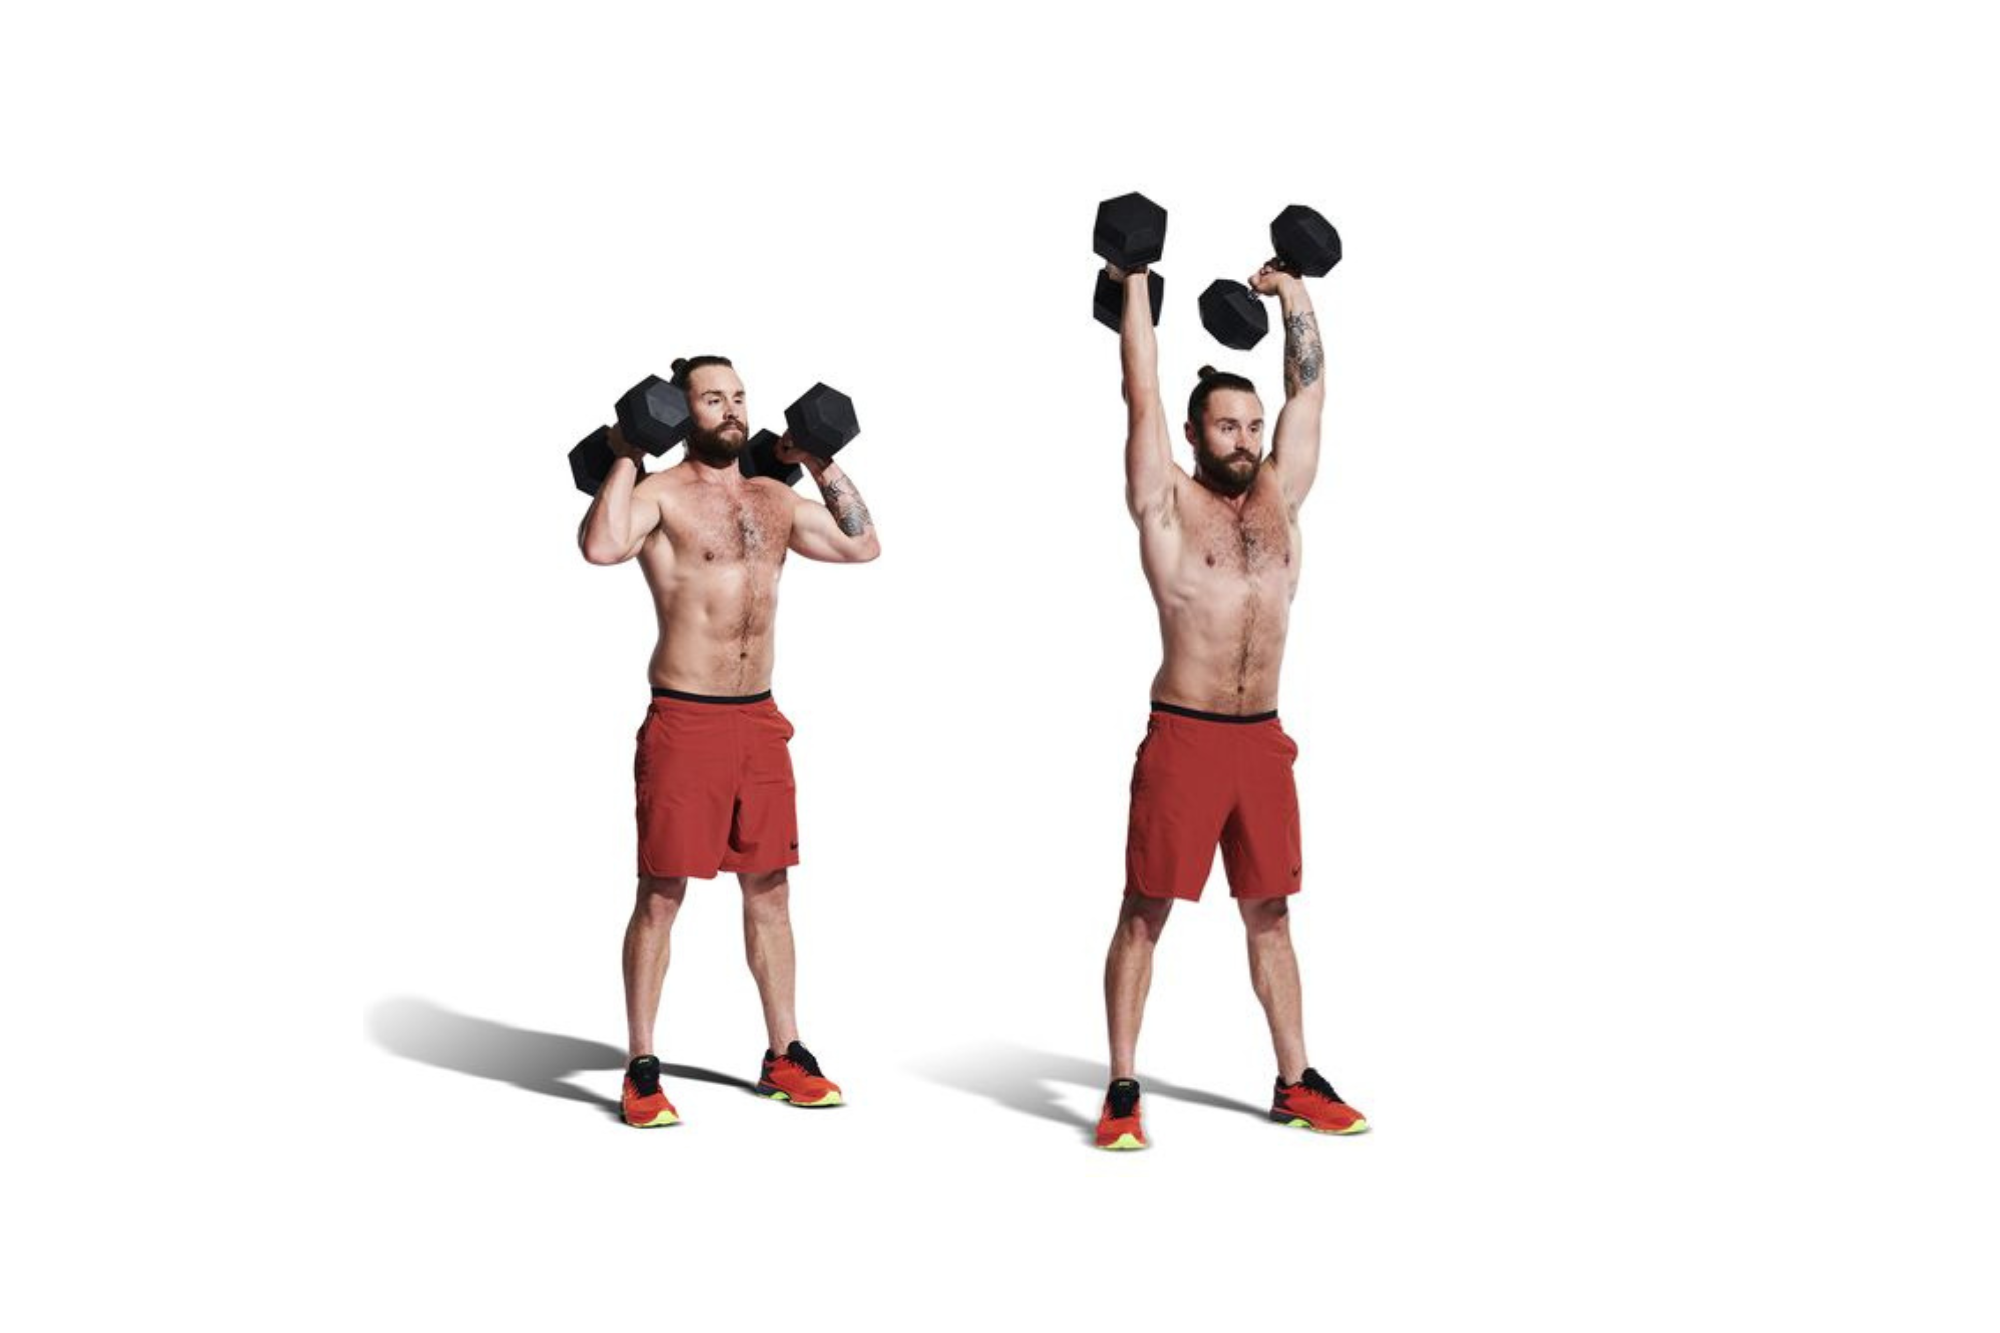 7 Killer Arm Exercises You Can Do Without Weights